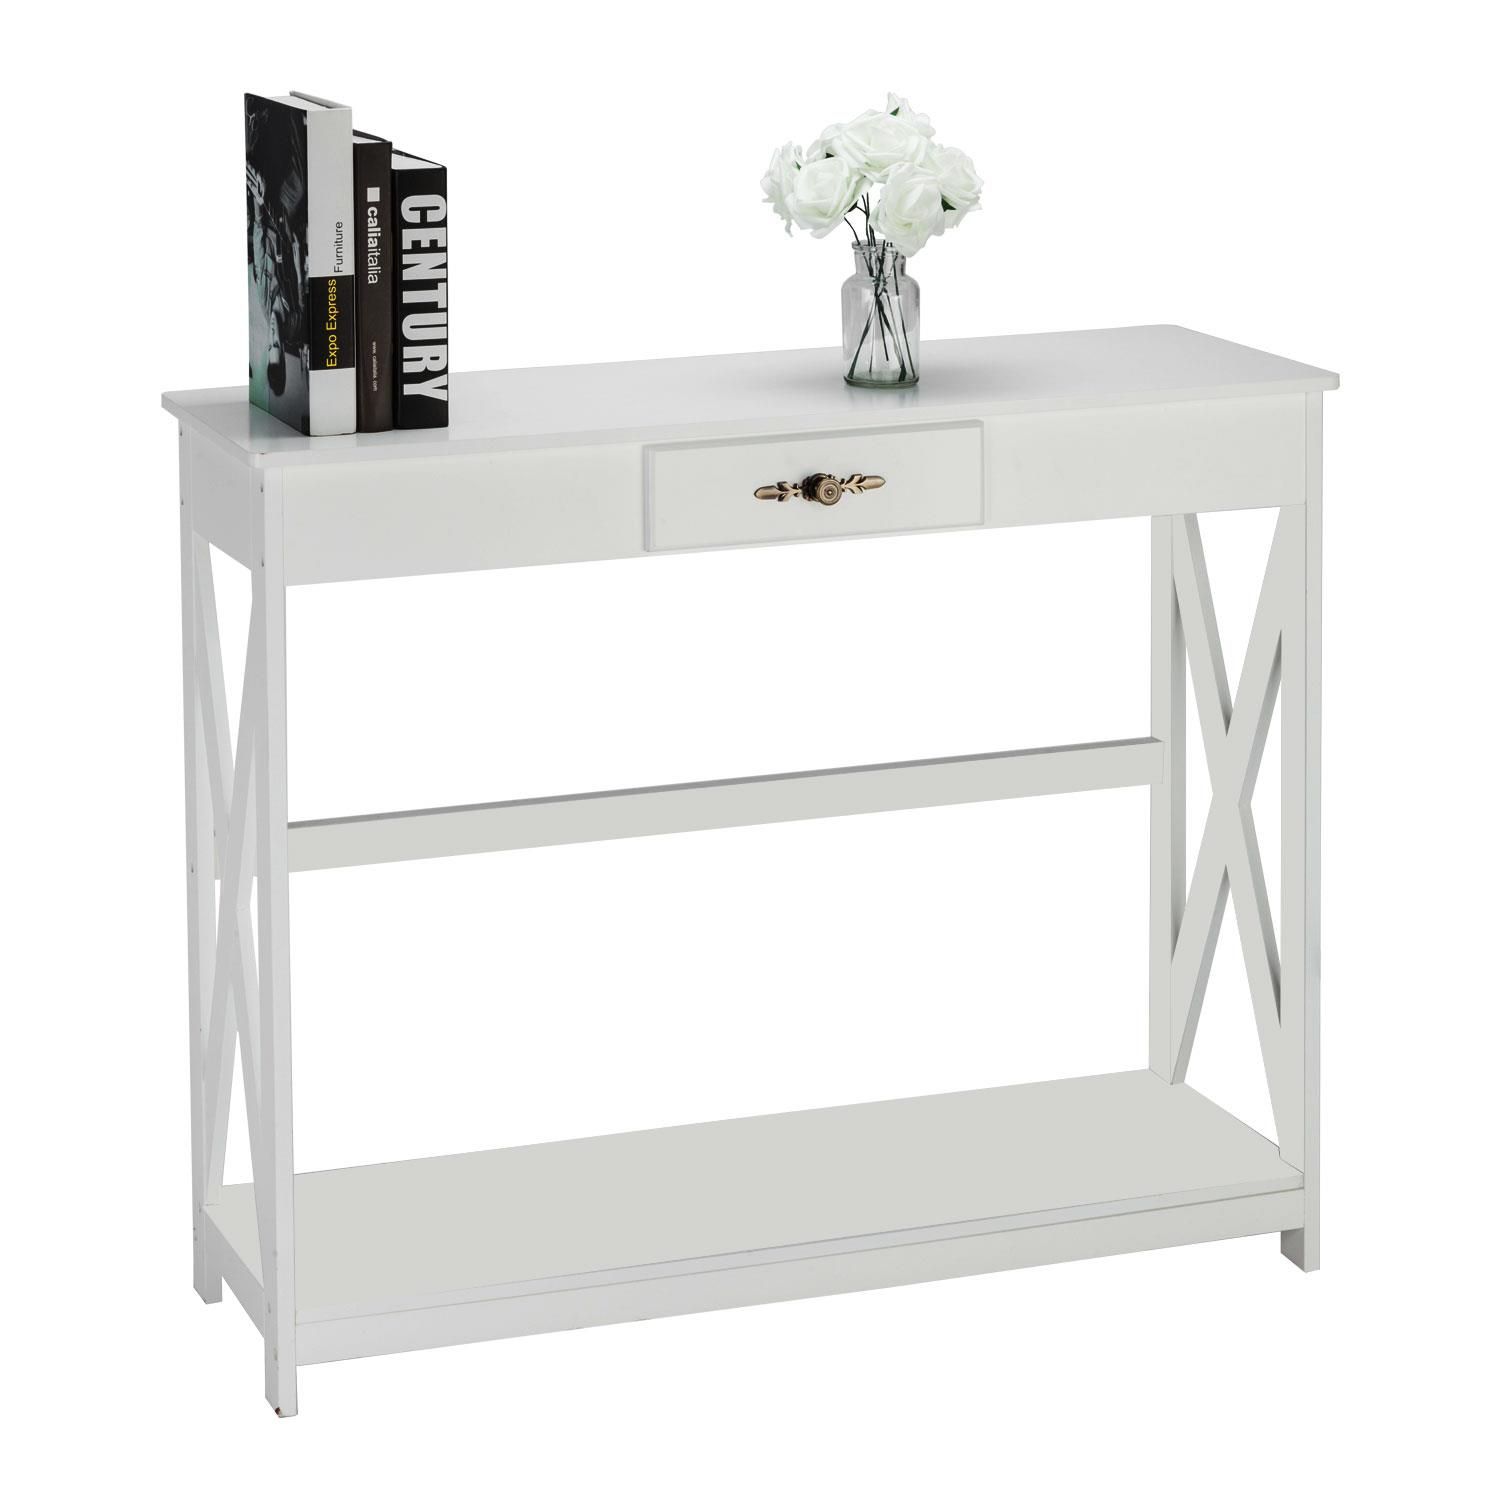 Ktaxon White Console Table Sofa Table With Drawer And With Regard To Geometric White Console Tables (View 14 of 20)